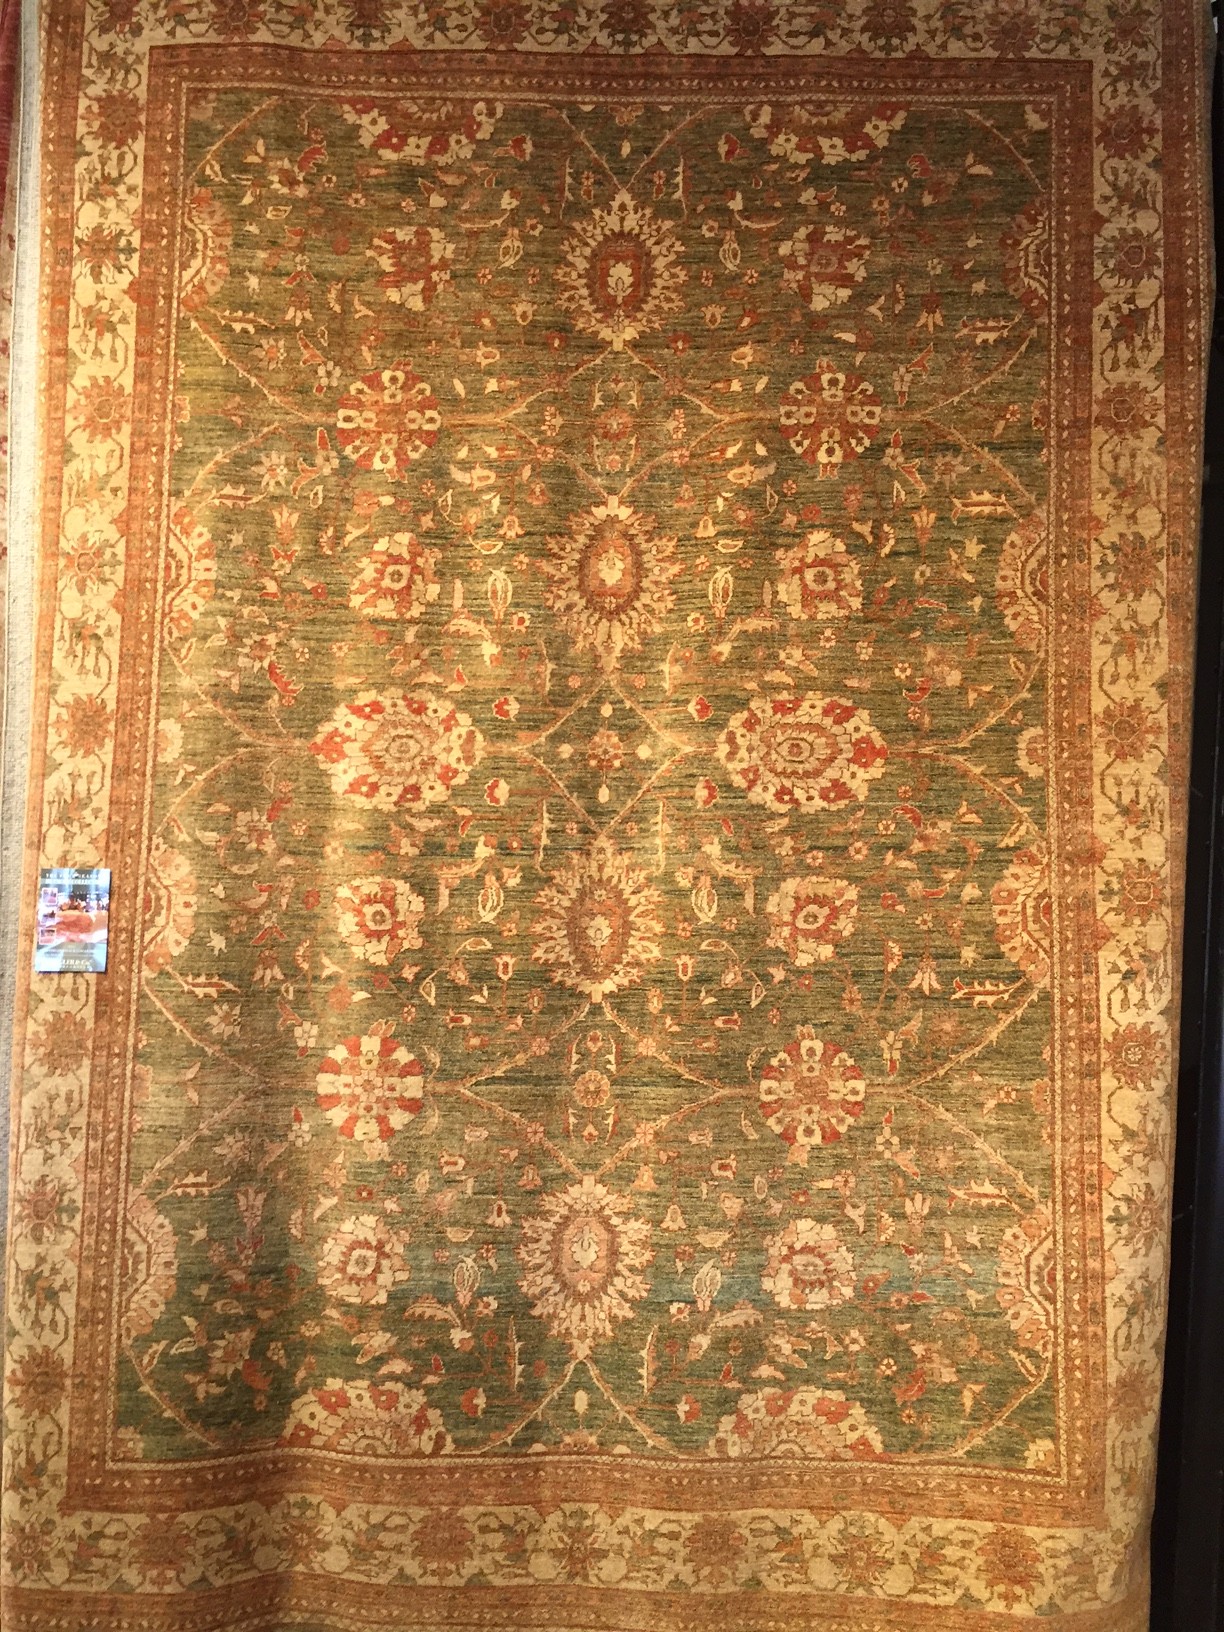 Classic Biltmore Collection of Hand-made Carpets